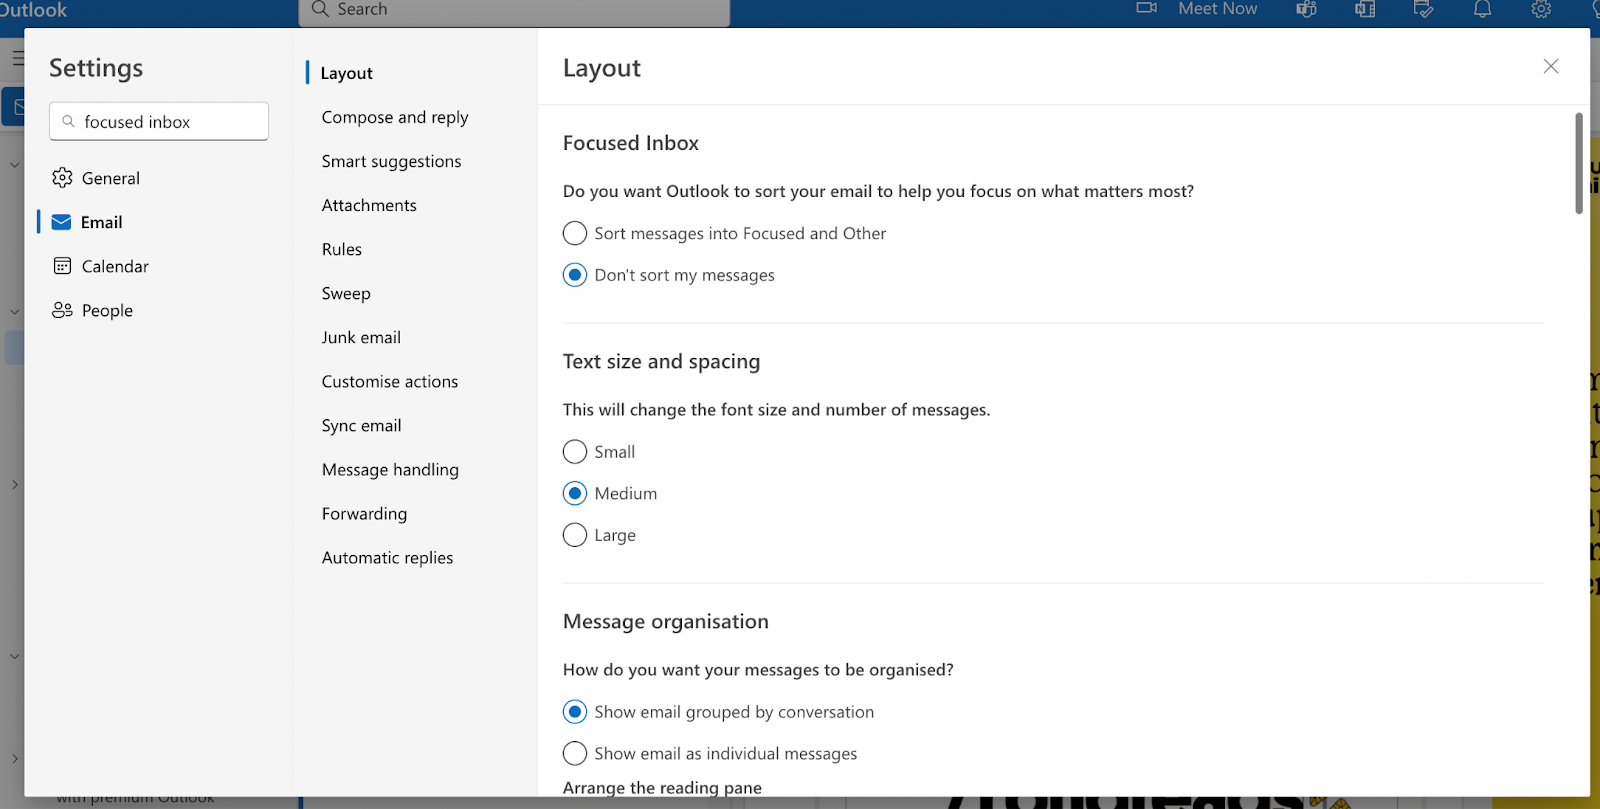 How to Organize Emails in Outlook